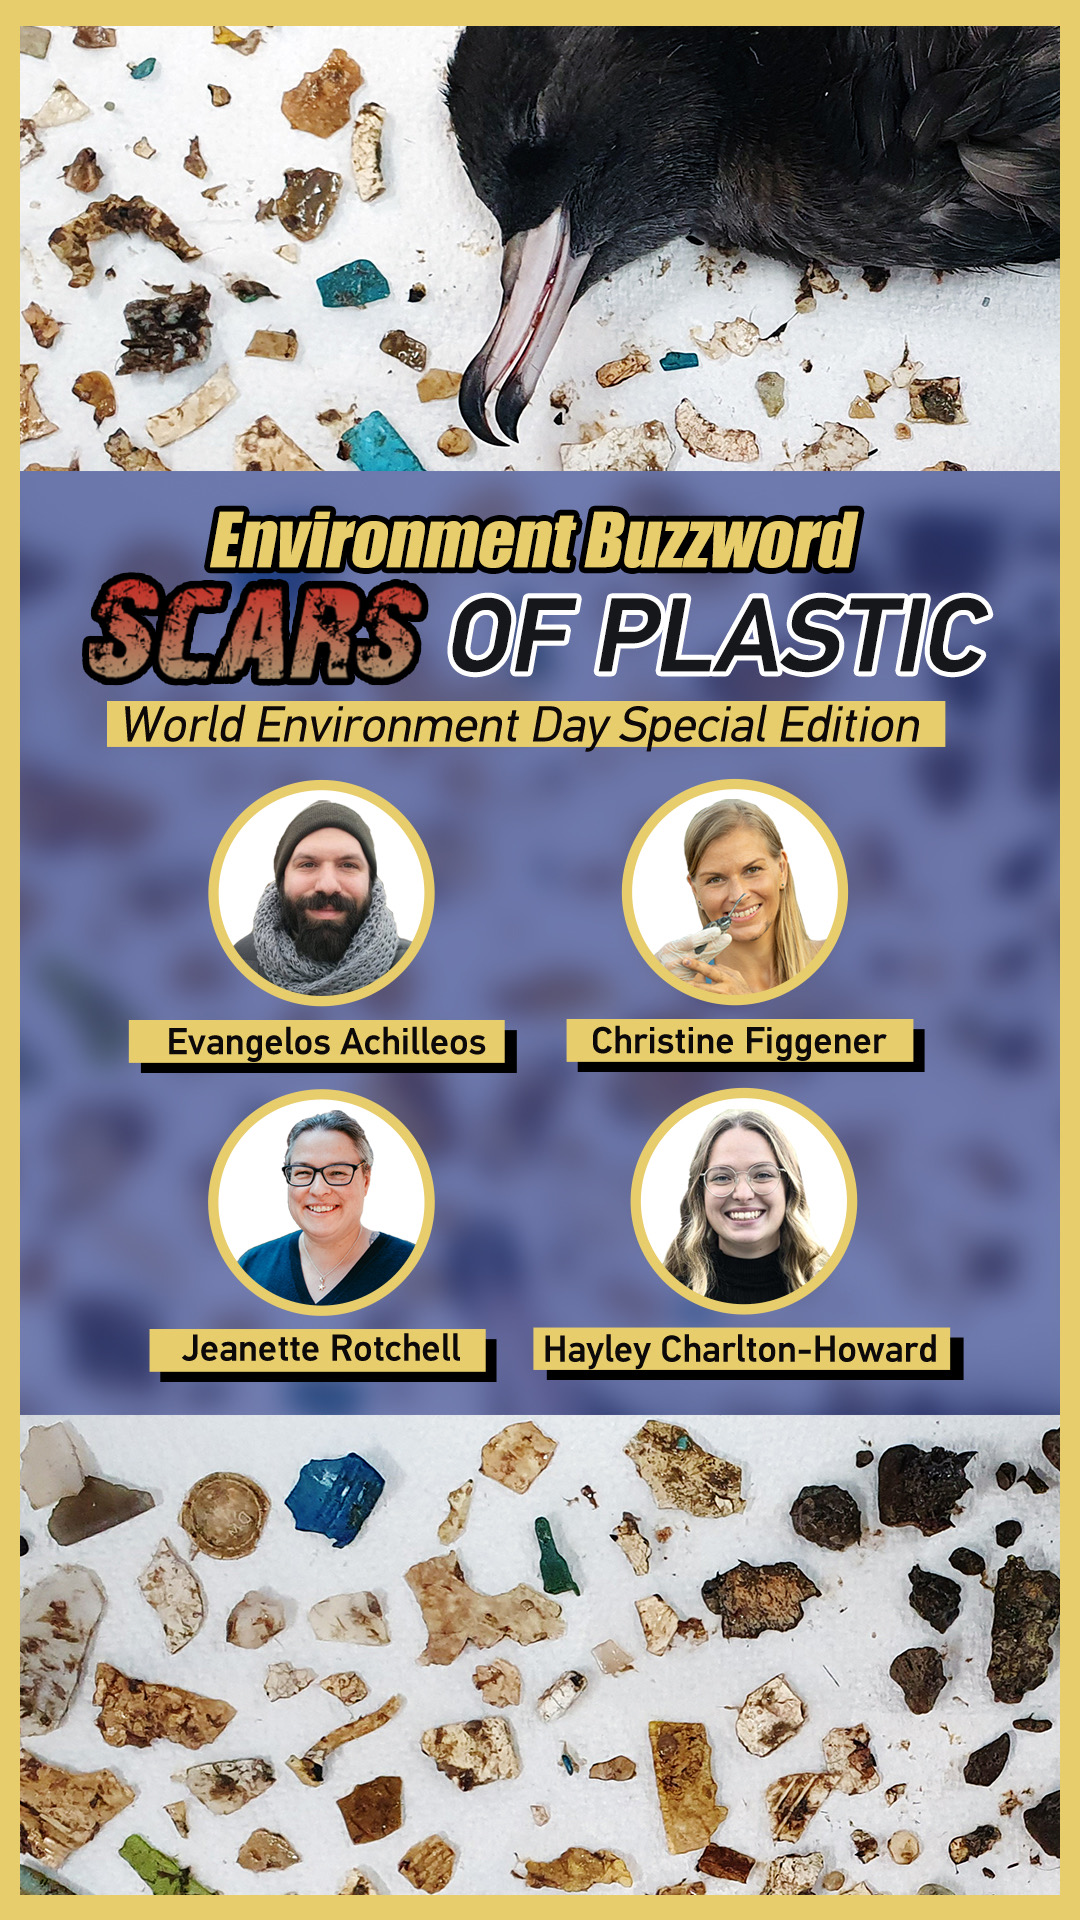 World Environment Day: Scars of plastic